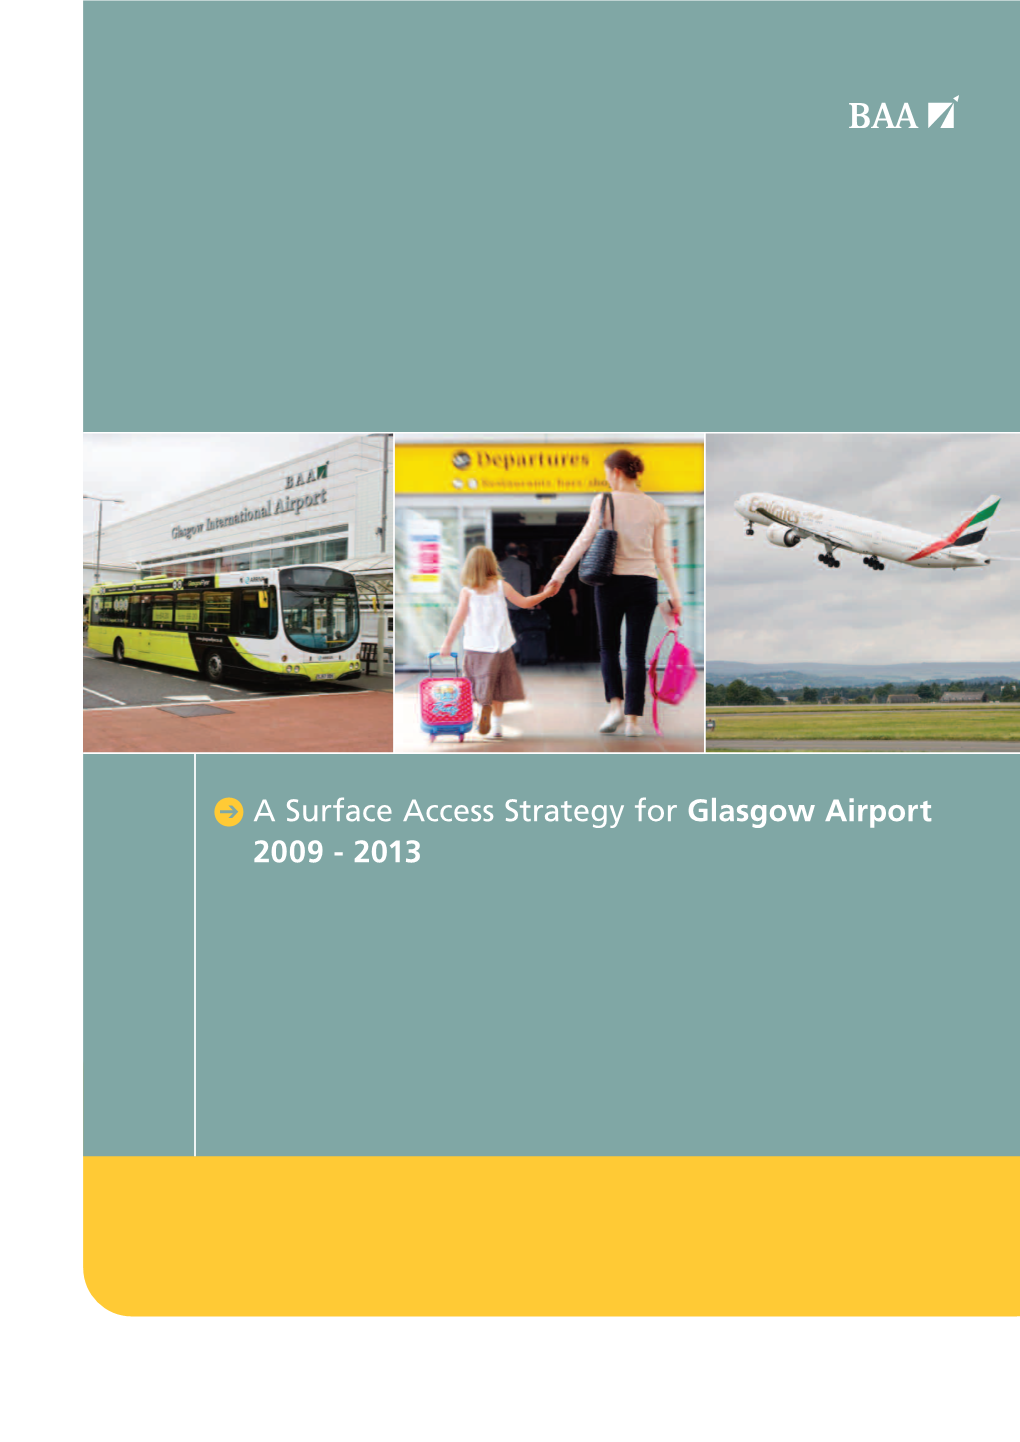 Glasgow Airport's Surface Access Strategy Can Be Viewed Here